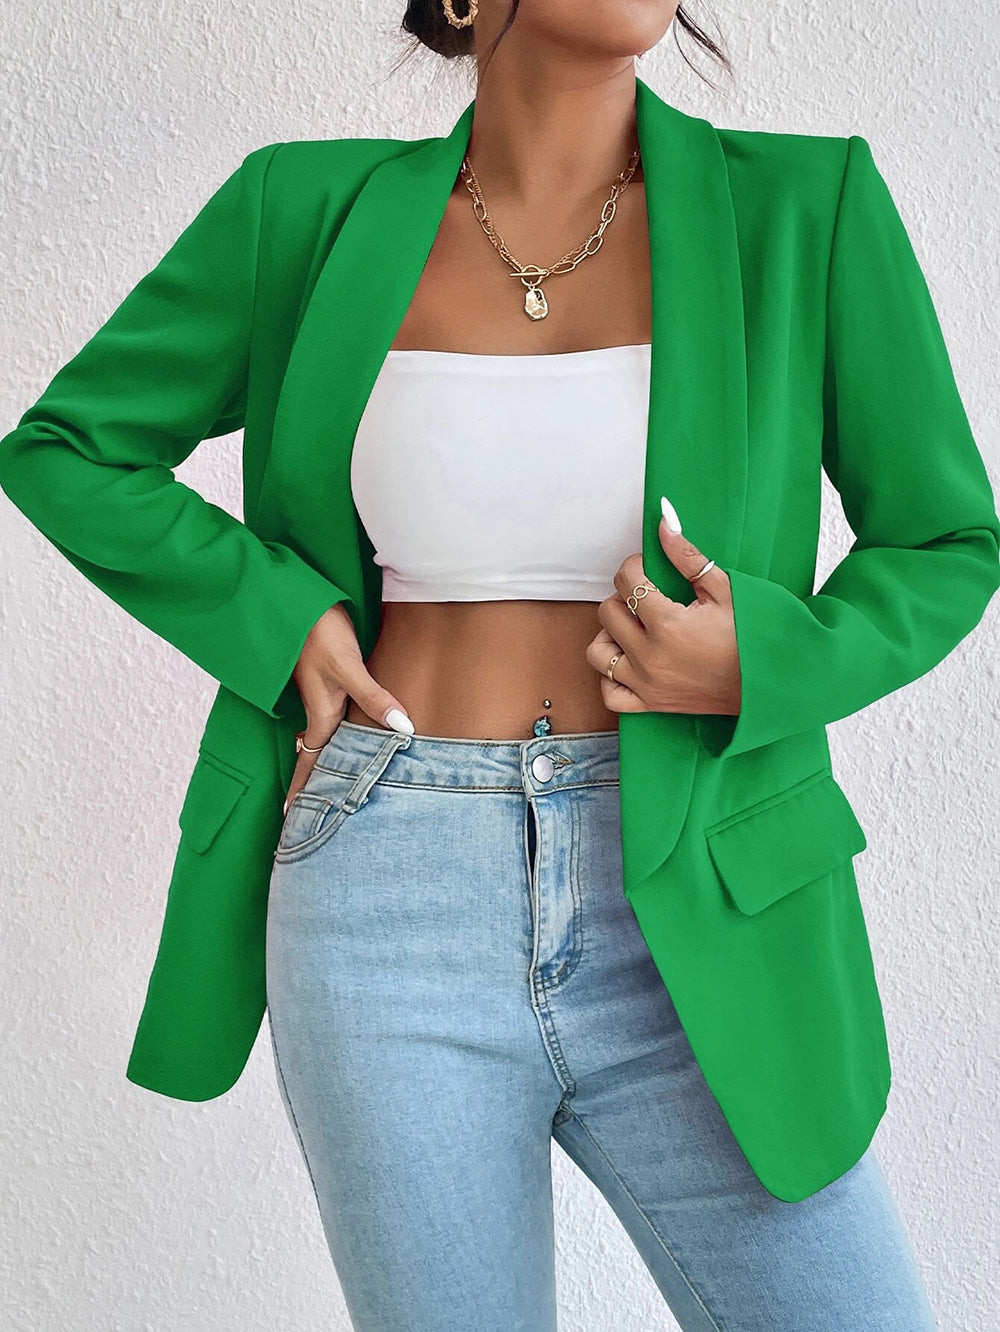 Women's Solid Color Collared Small Office Jacket